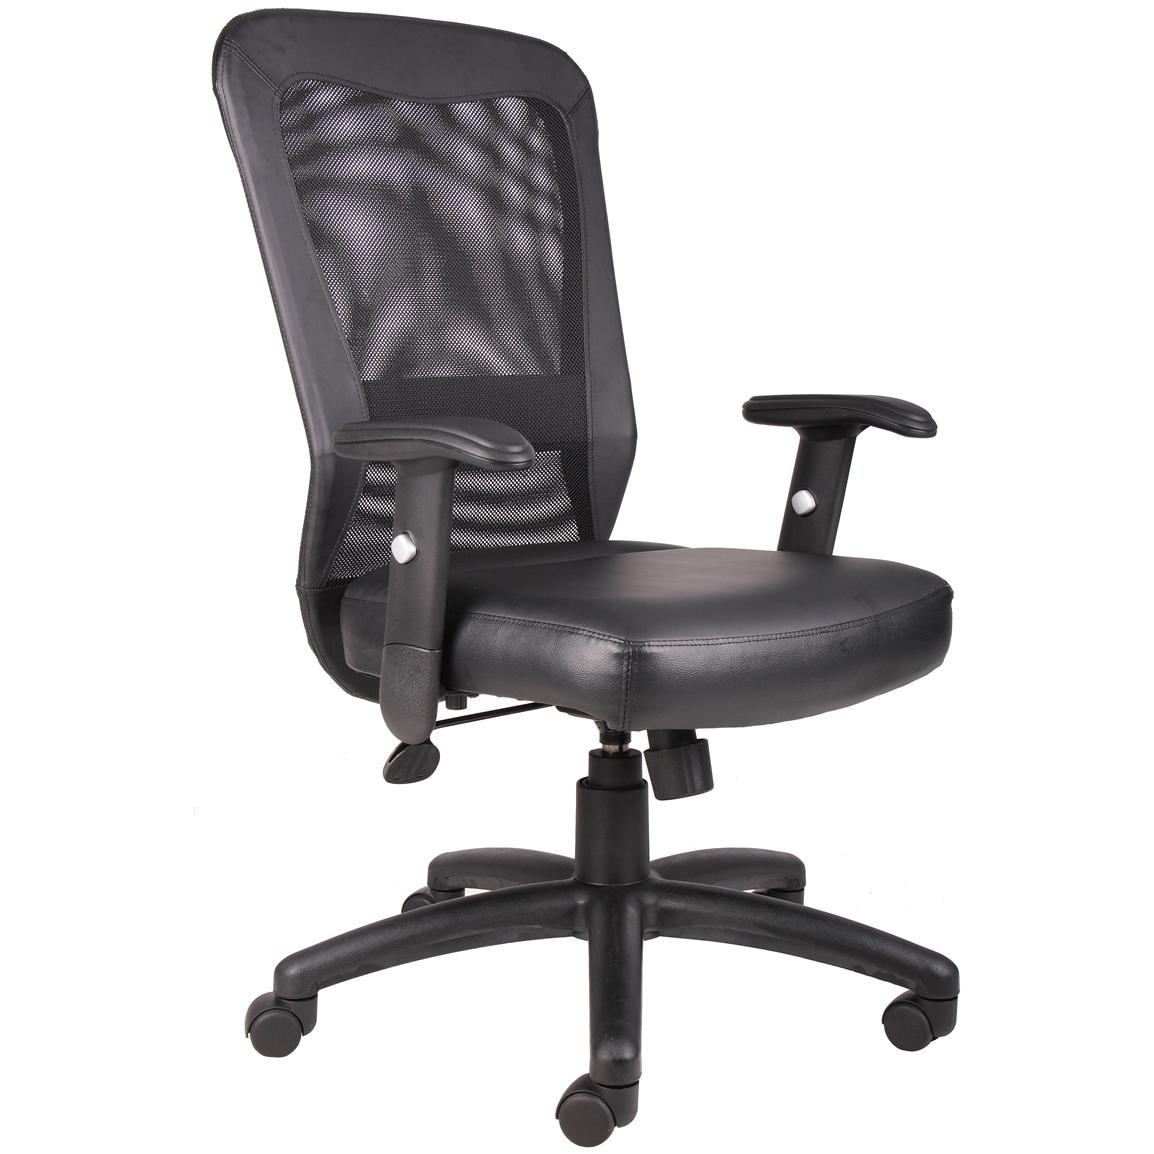 Boss Mesh Executive Chair - 134995, Office at Sportsman's Guide